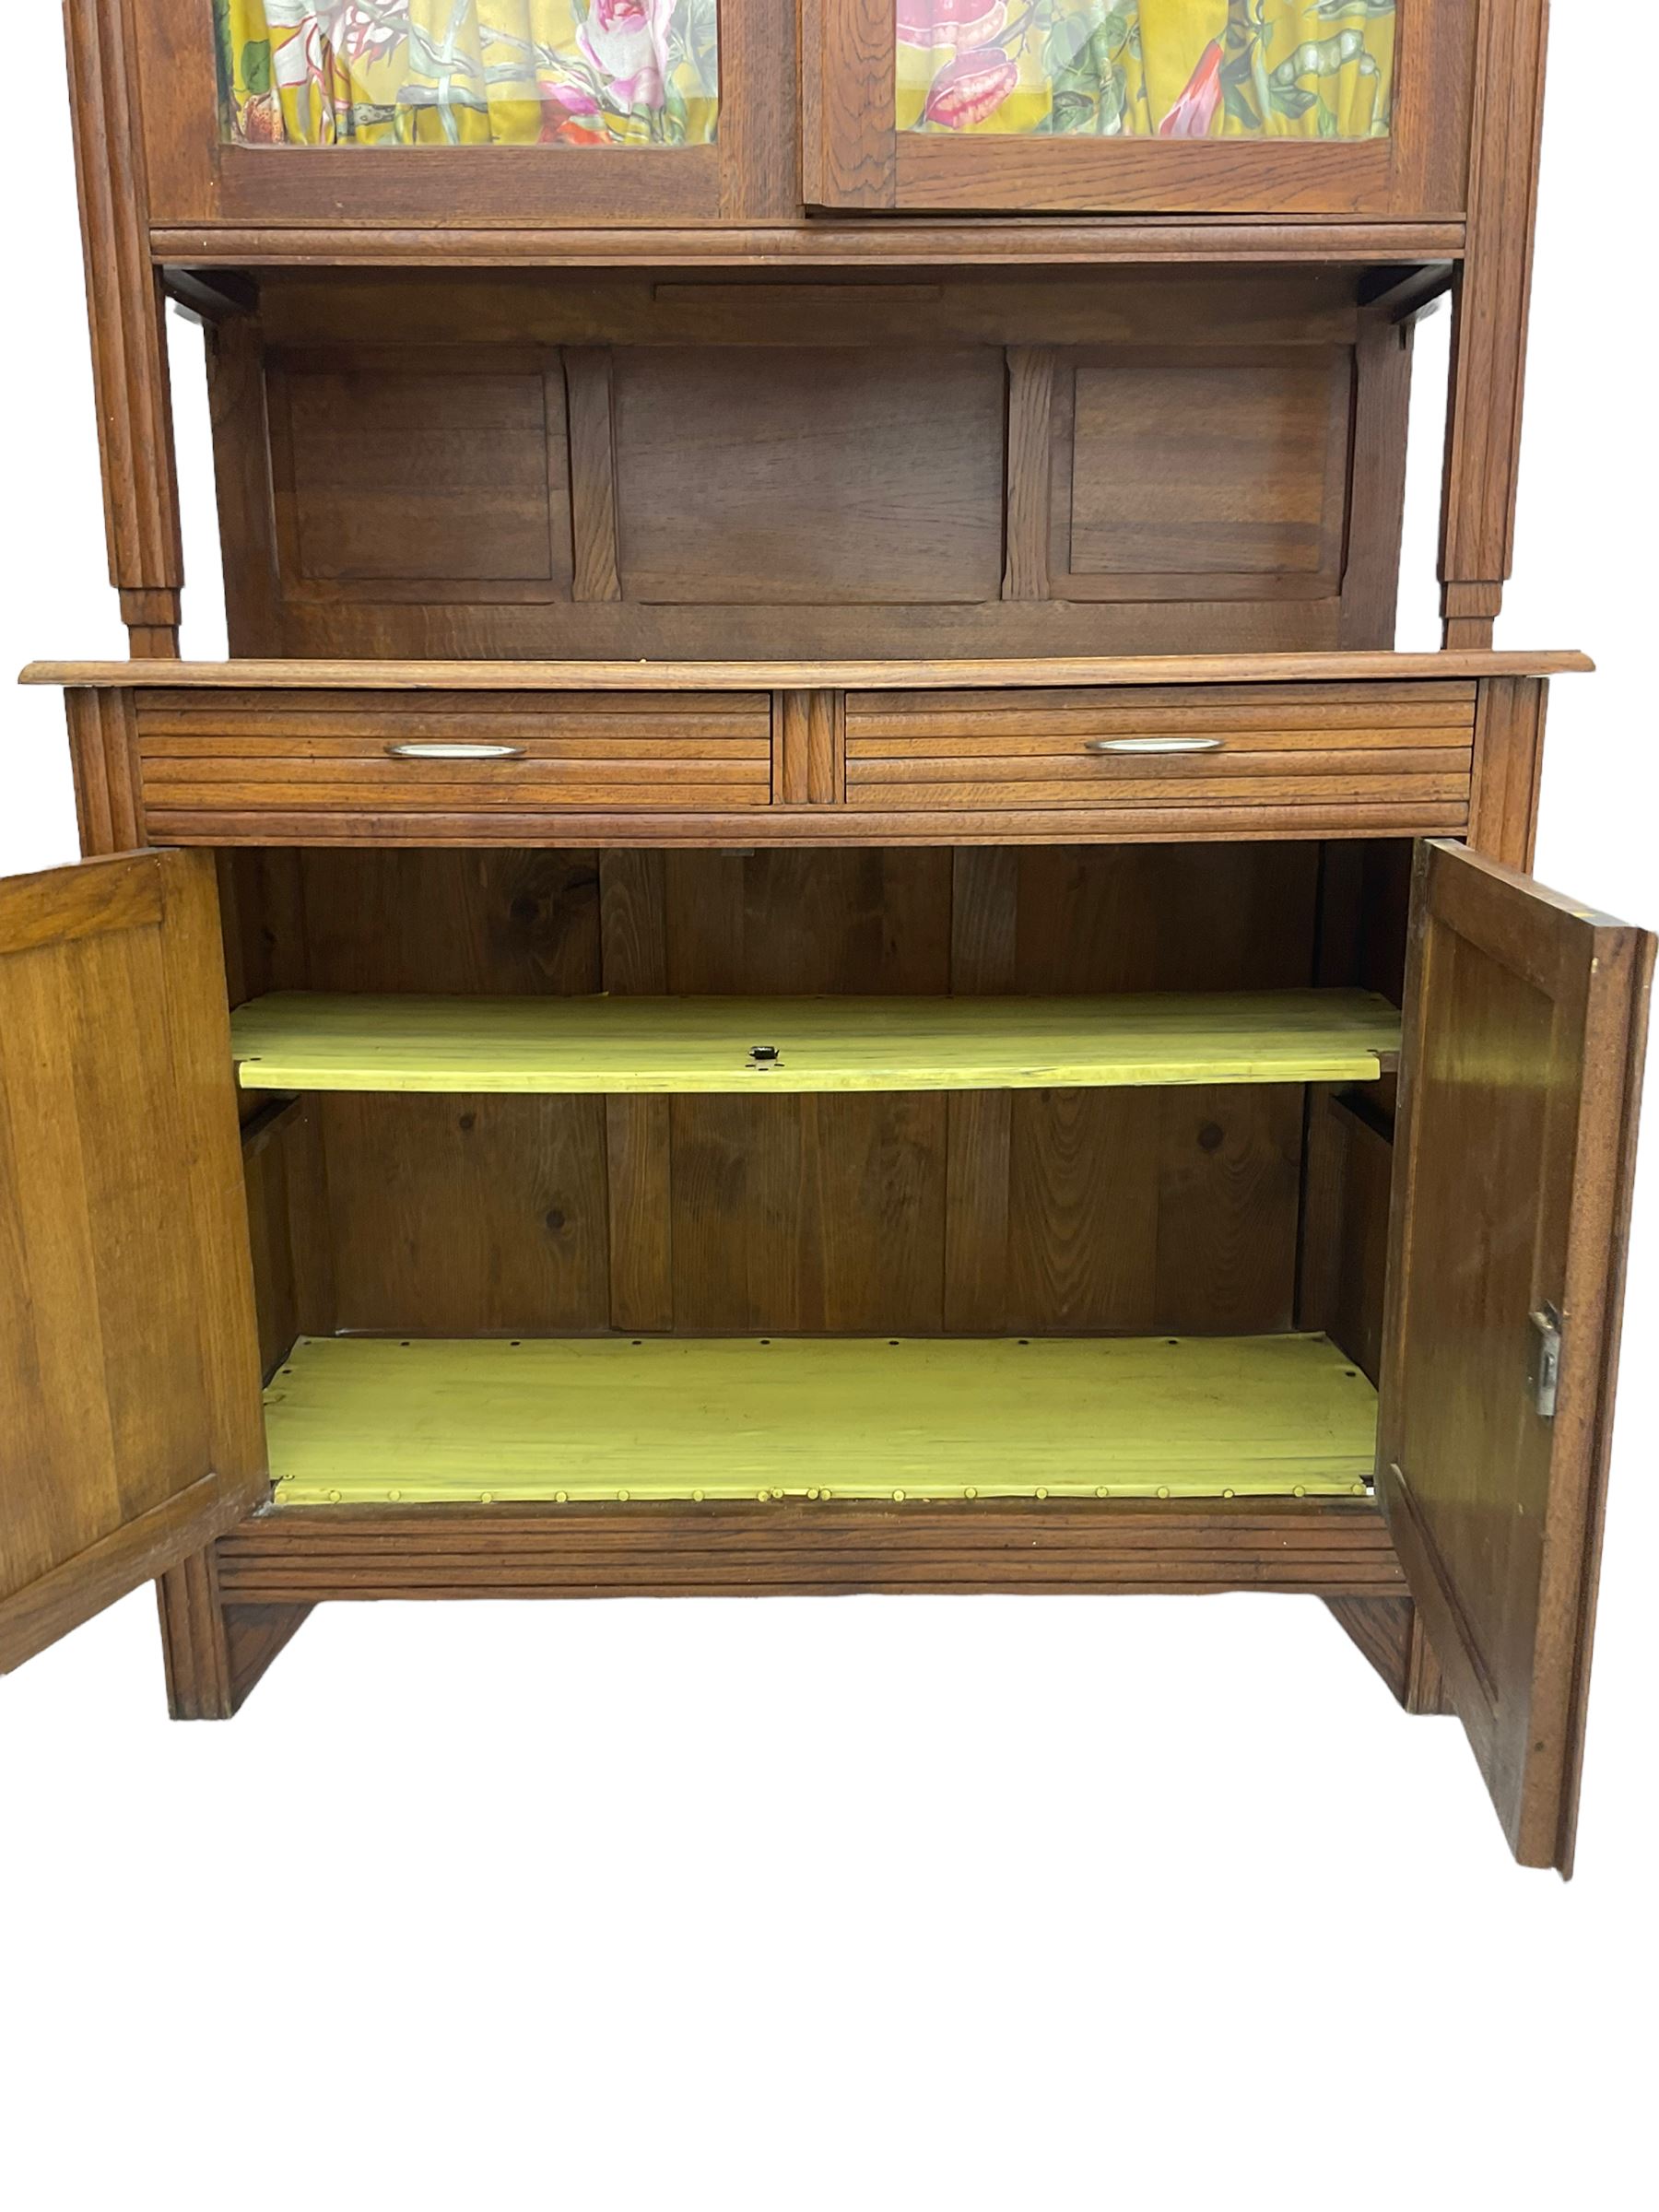 Early to mid-20th century oak dresser - Image 8 of 8